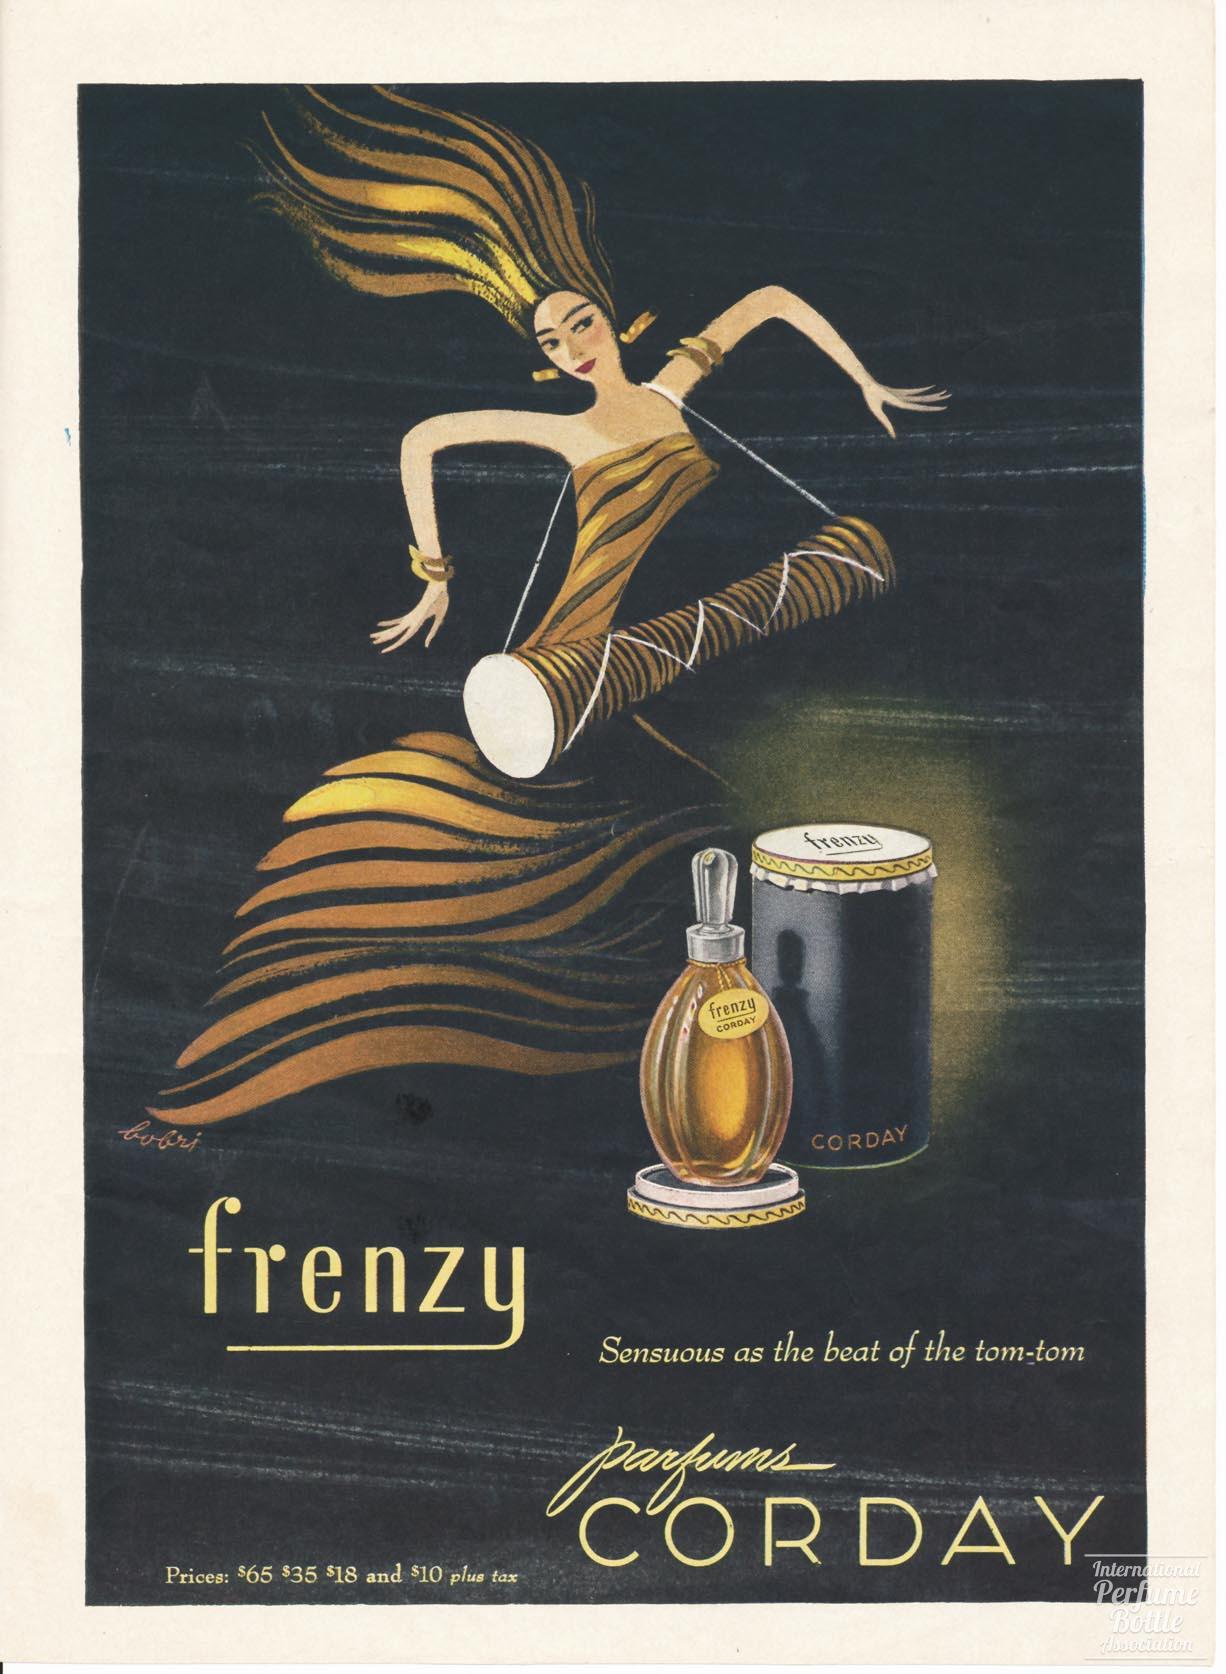 "Frenzy" by Corday Advertisement - 1945